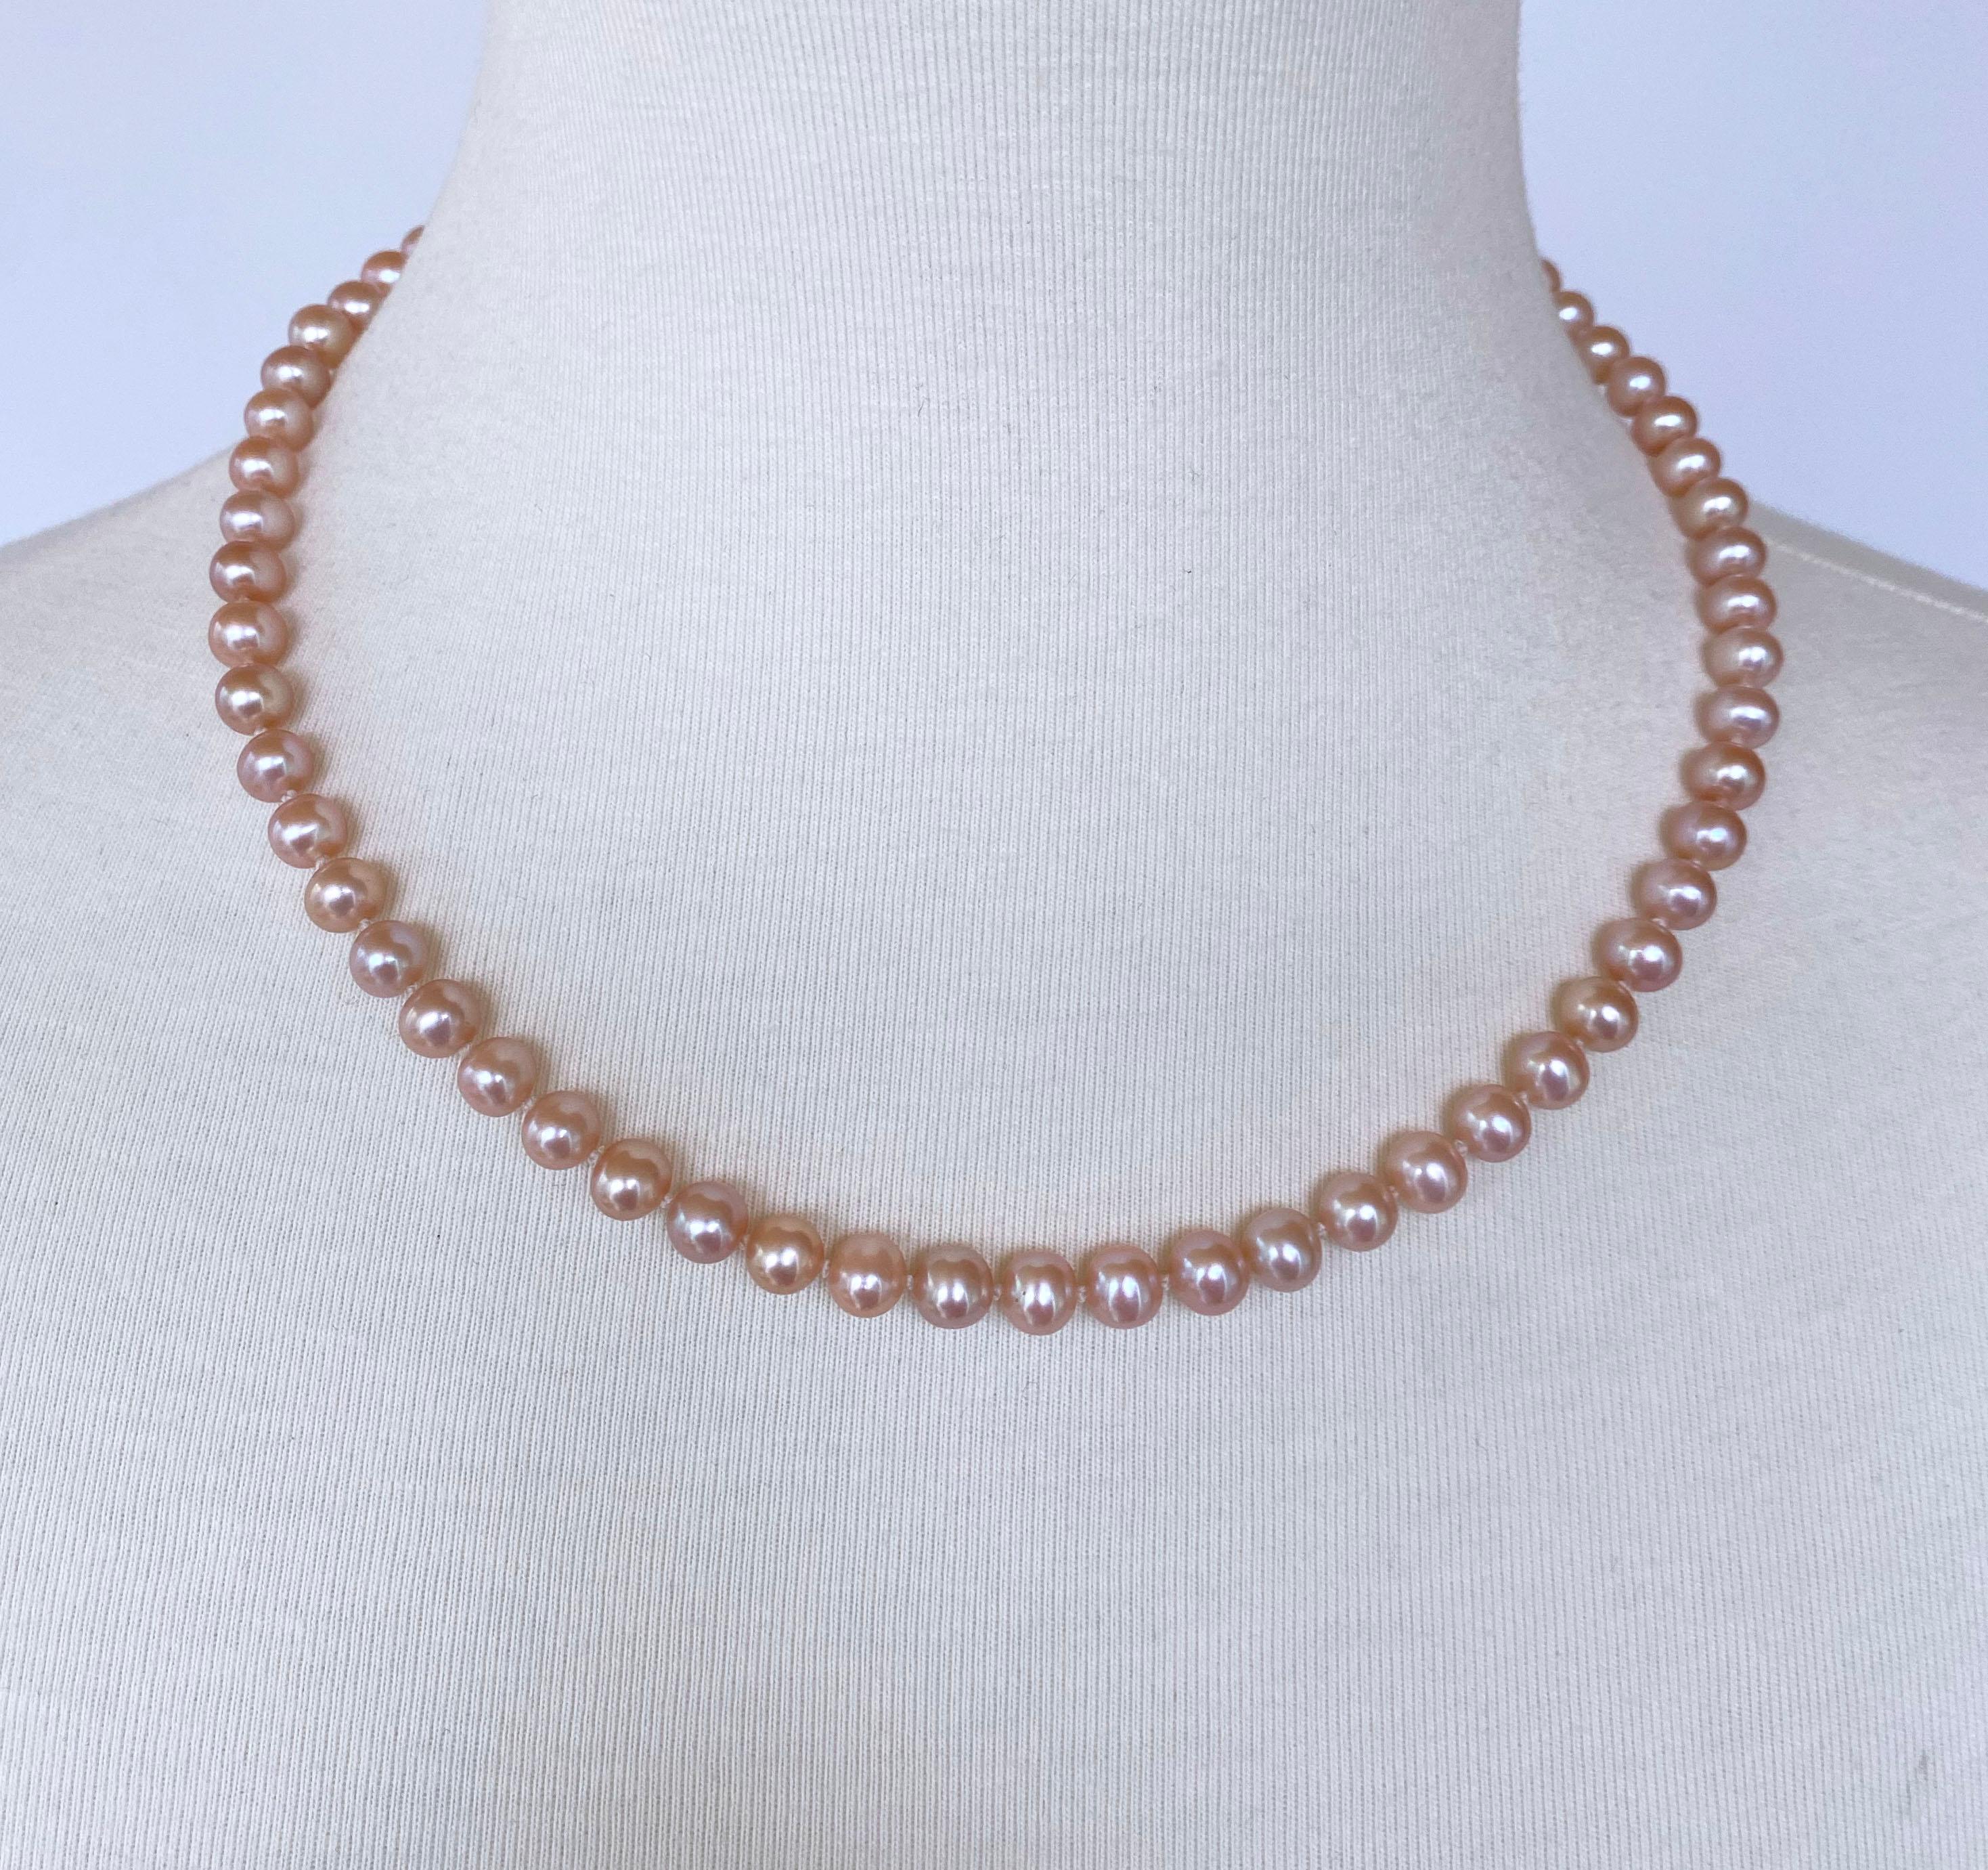 Simple yet striking necklace by Marina J made in Los Angeles. This unisex necklace features natural Pink Pearls which display a wild iridescence and luster; radiating stunning hues of Oranges and Pinks when hit with light. Measuring 18.75 inches